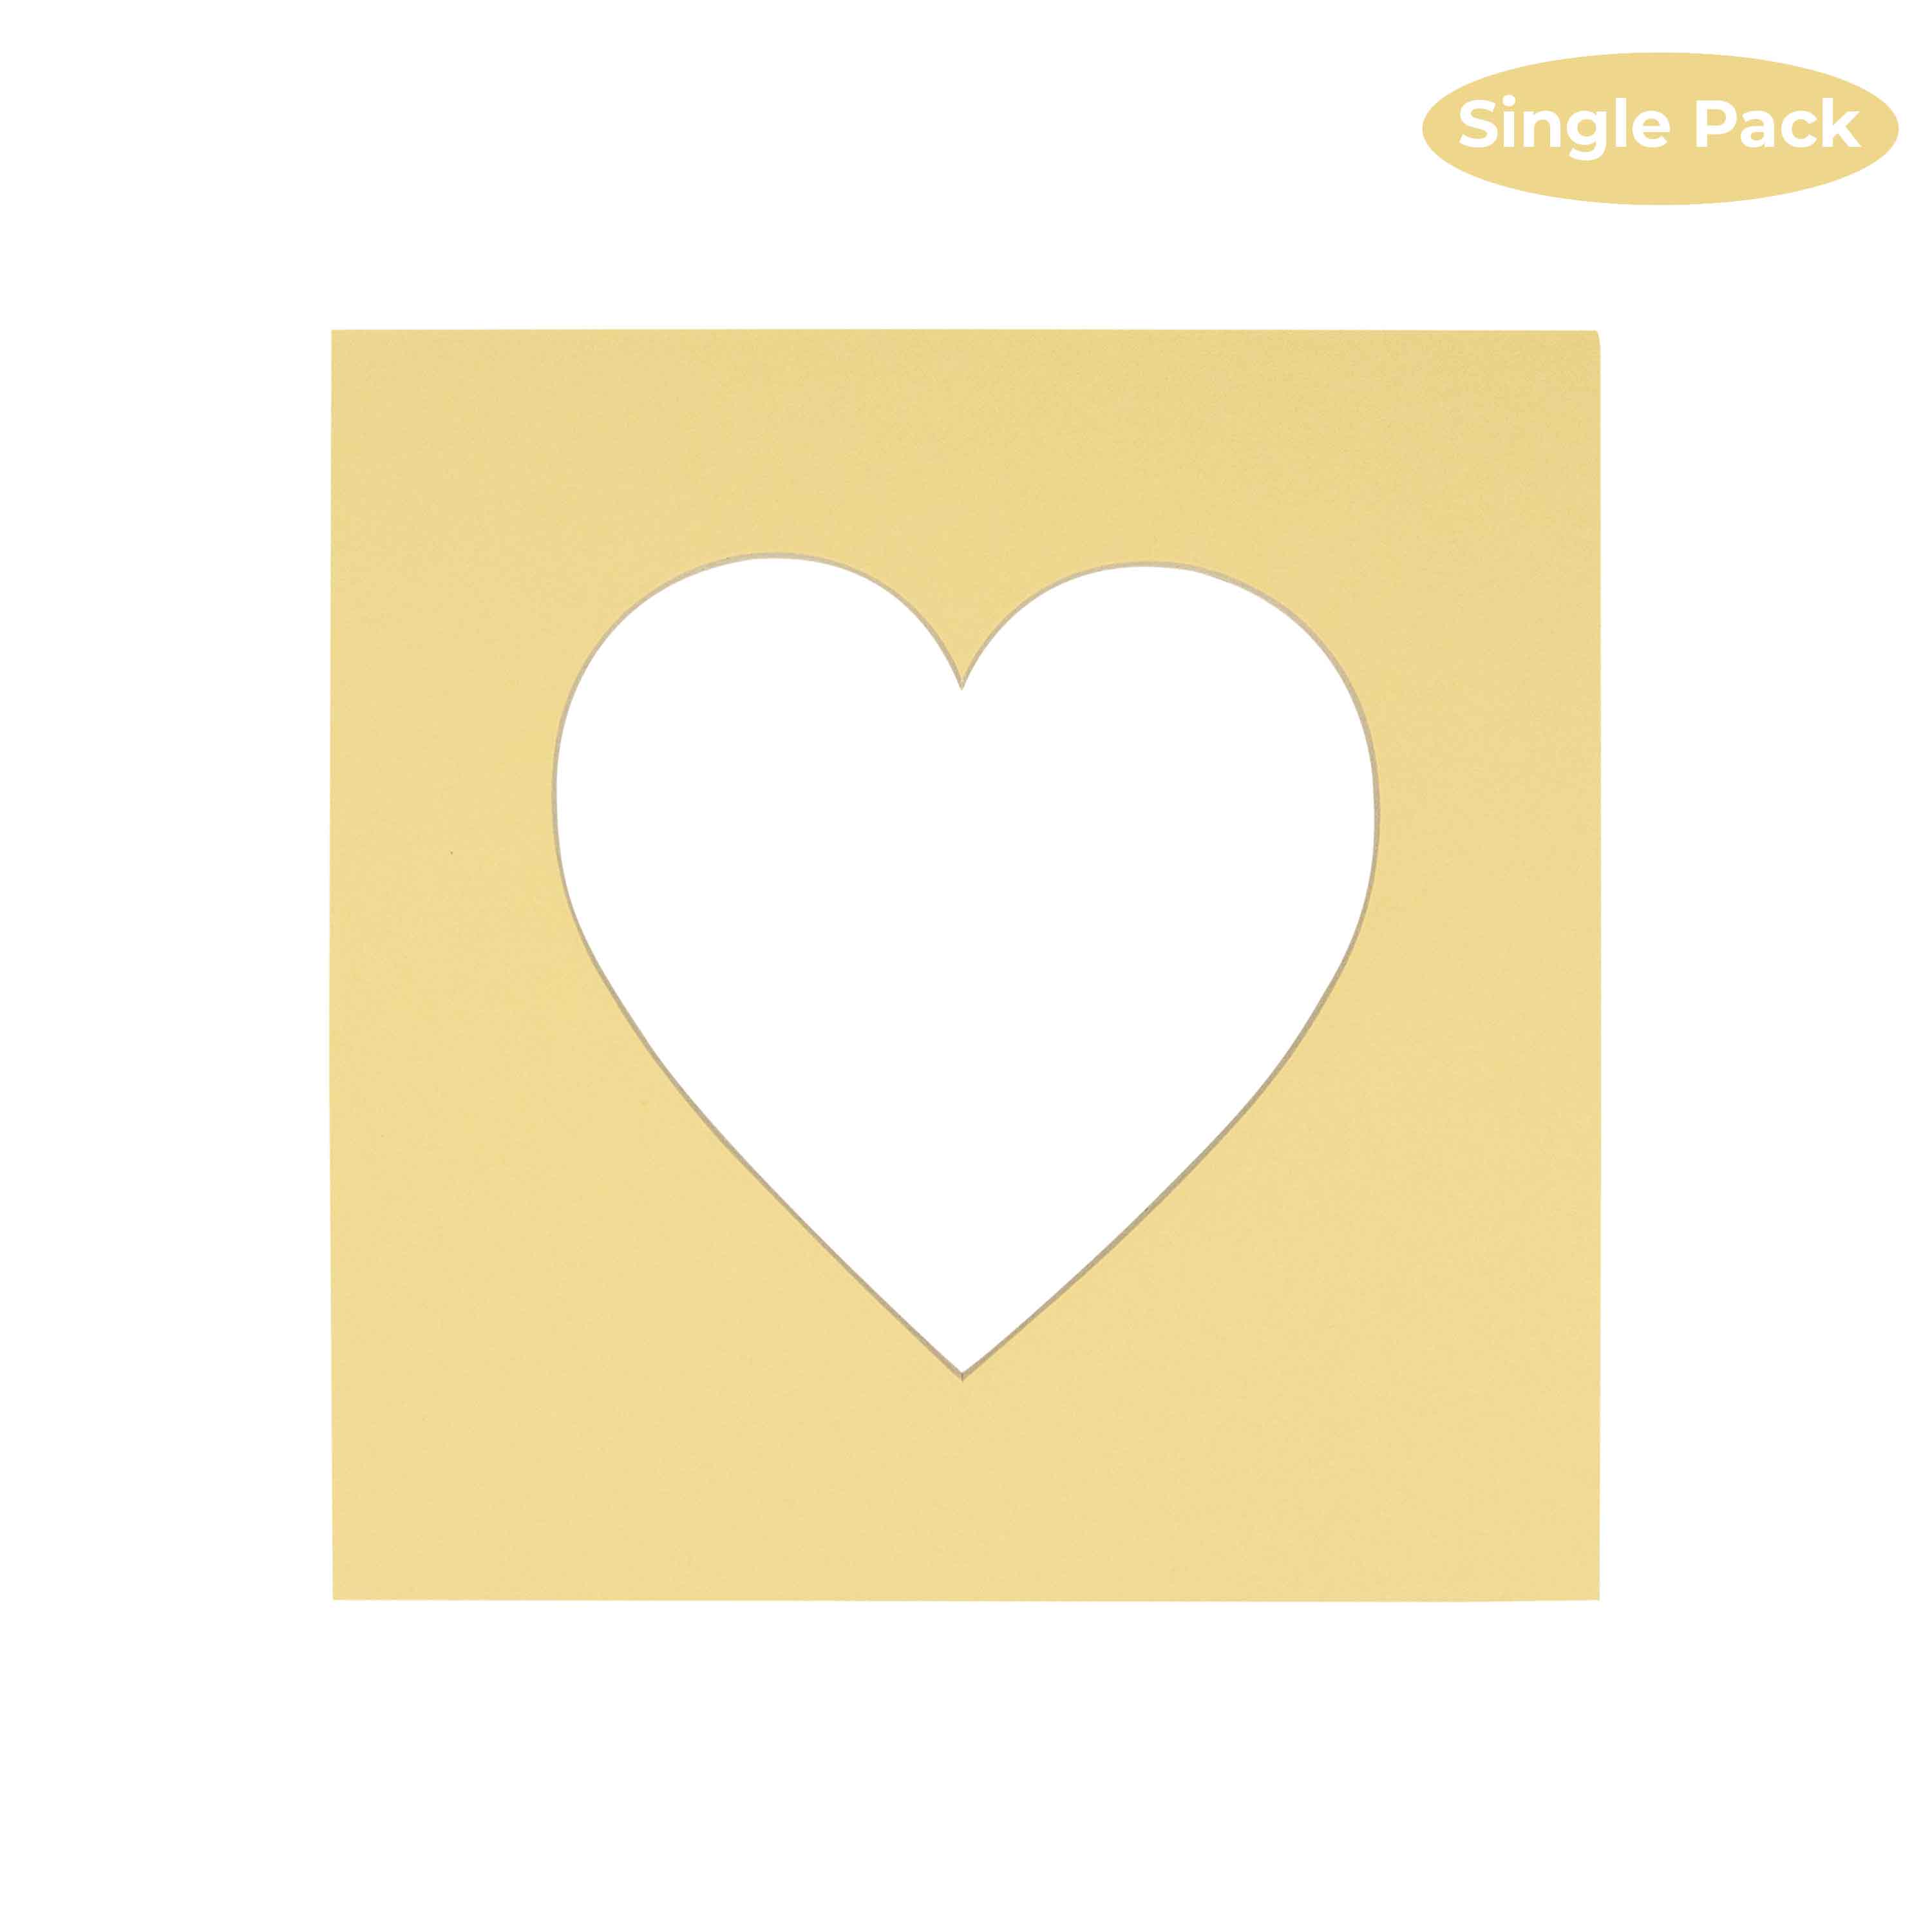 CustomPictureFrames.com Soft Yellow Acid Free 7x7 Heart Picture Frame Mat with White Core Bevel Cut for 4x5 Pictures - Fits 7x7 Frame